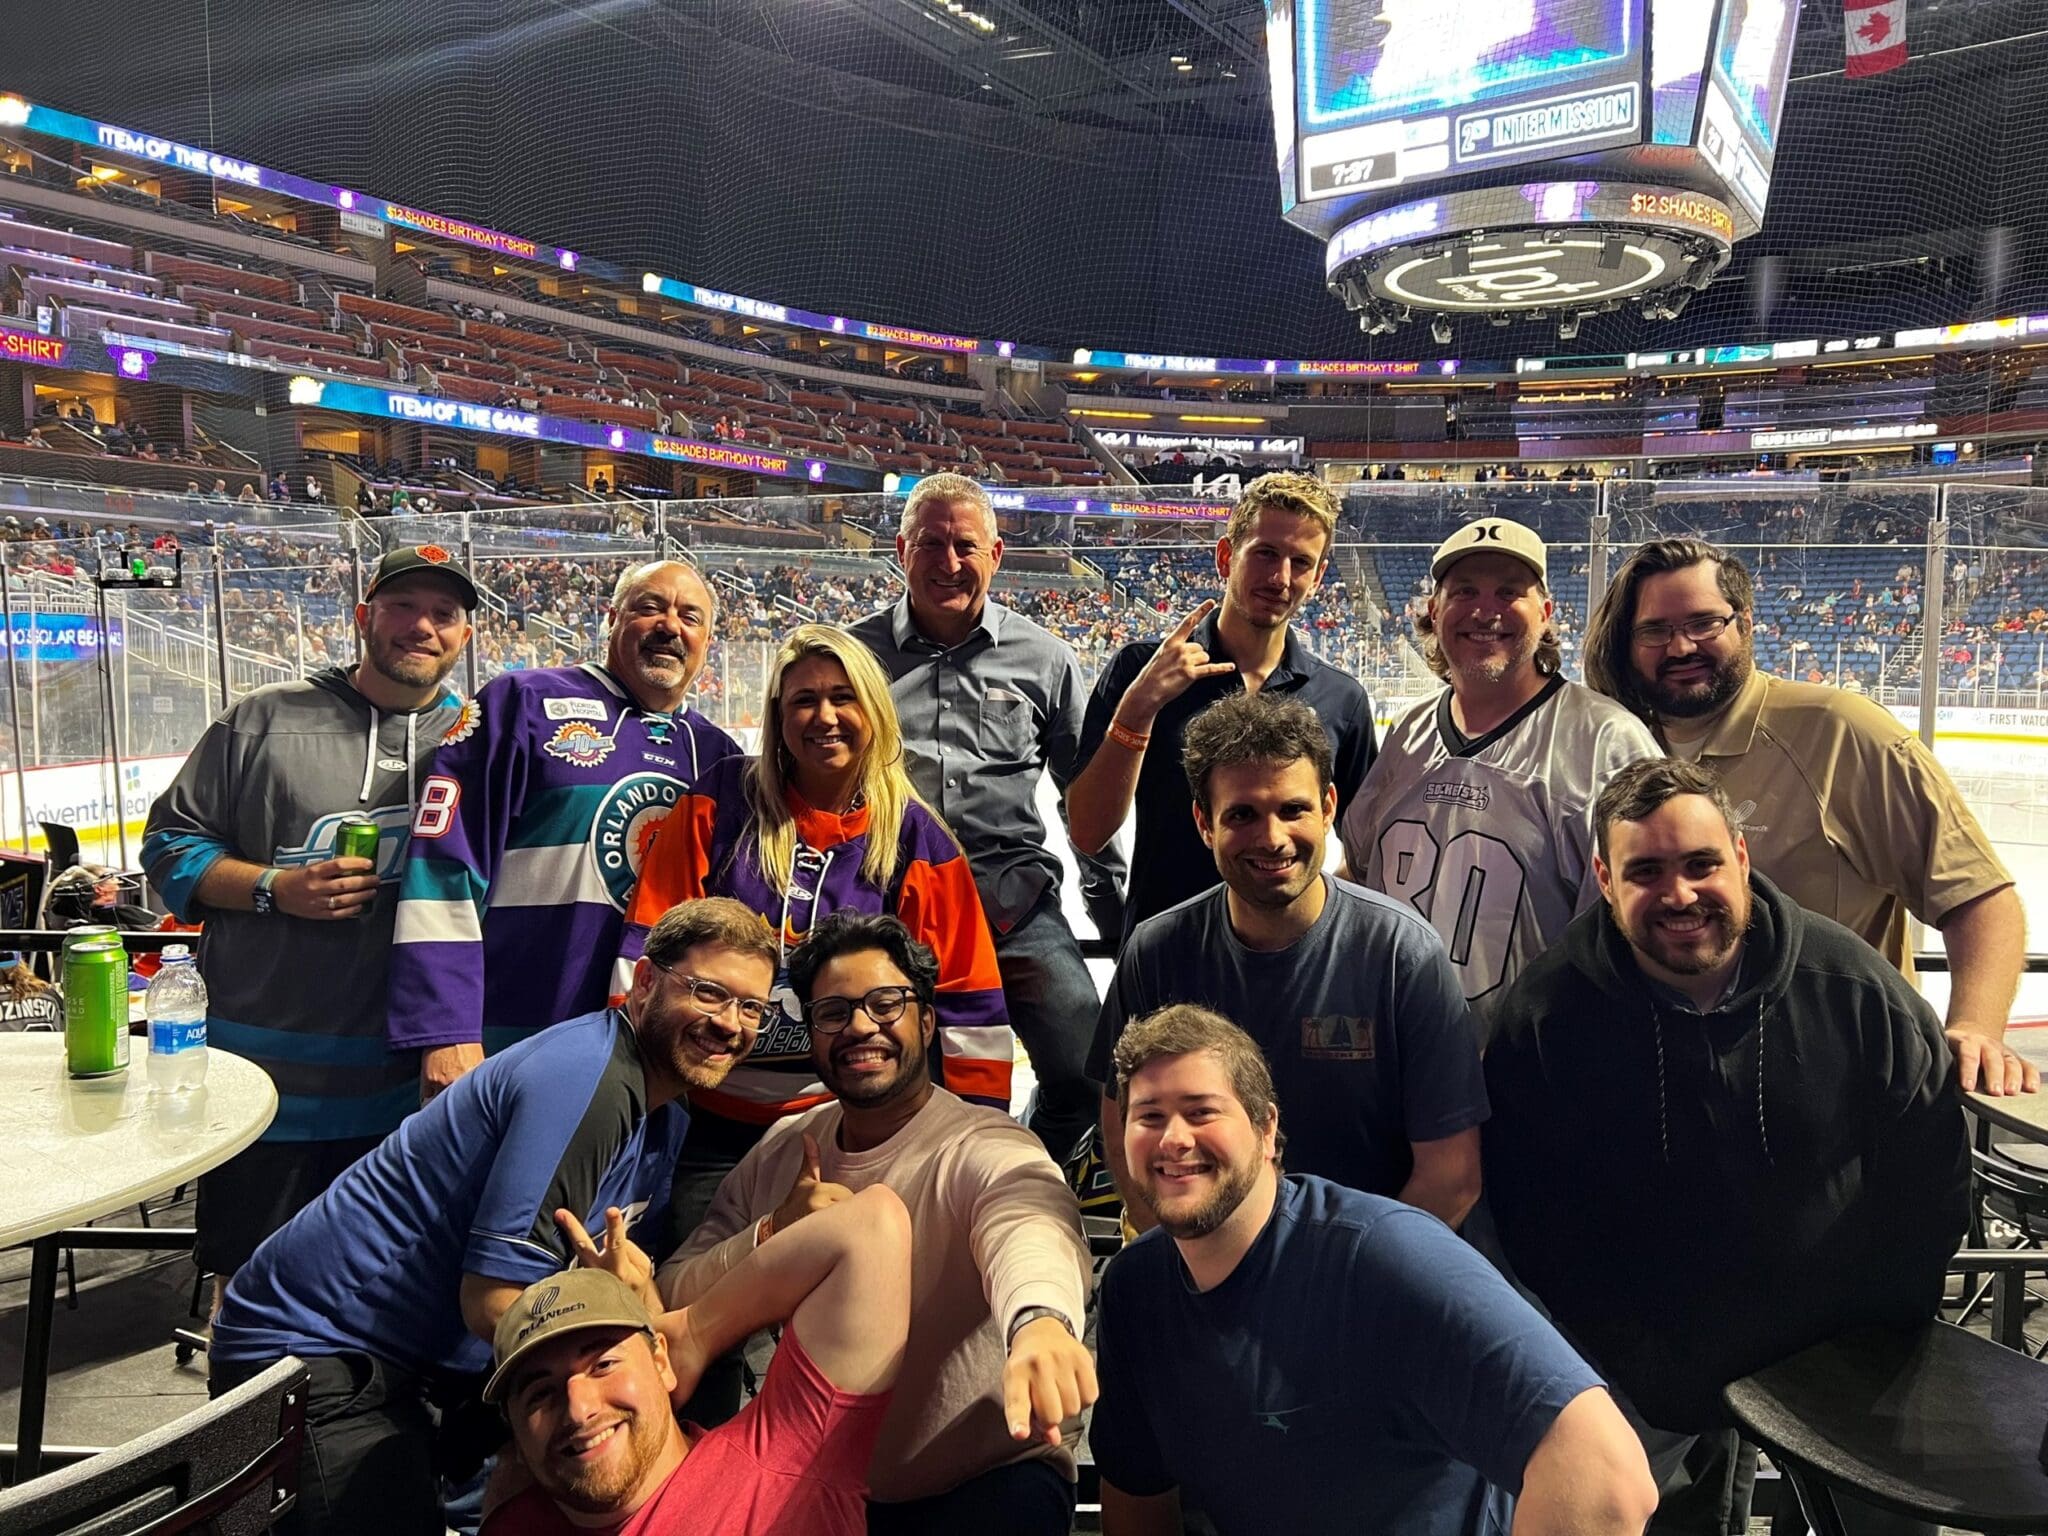 OrLANtech team at Solar Bears game in 2022